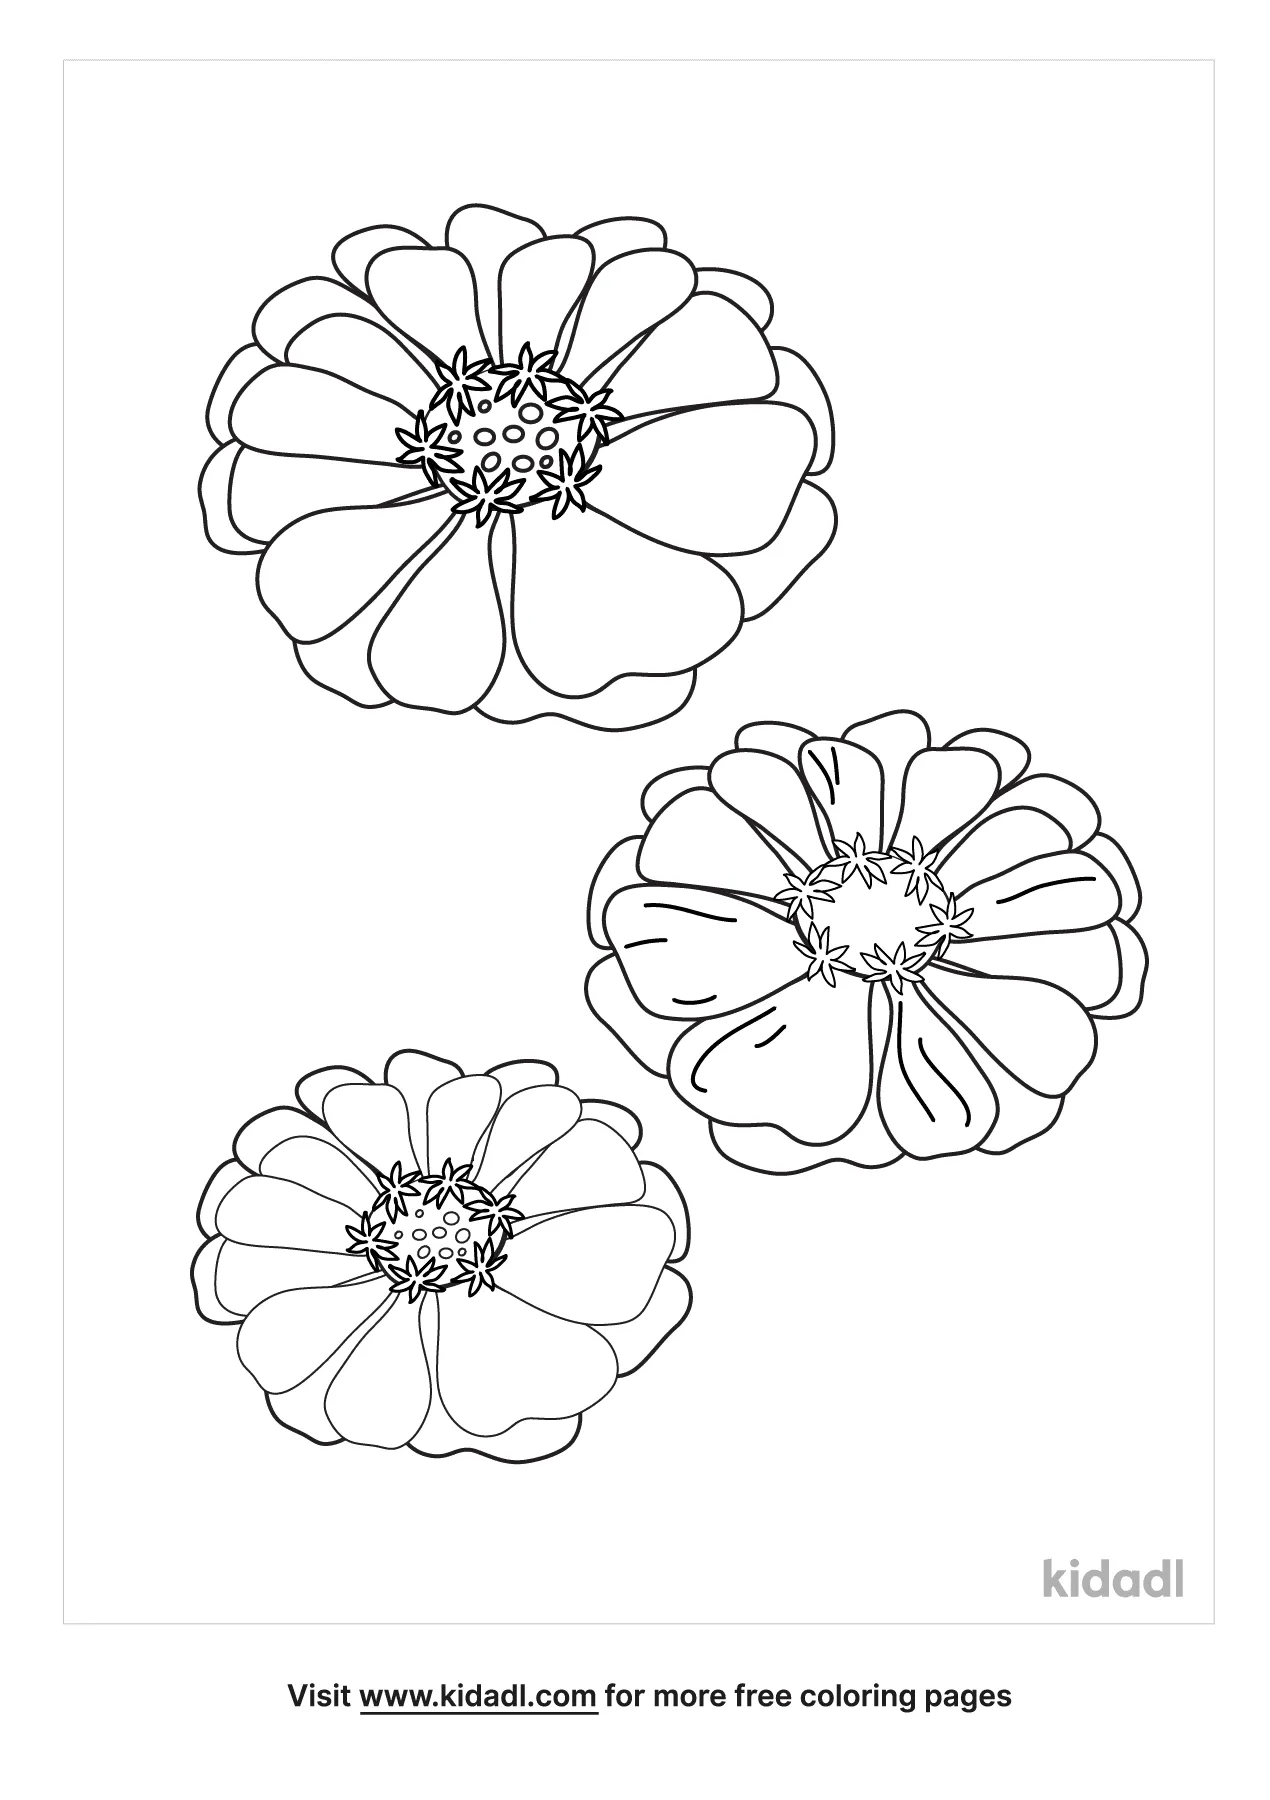 Zinnia Coloring Pages   Free Flowers Coloring Pages   Kidadl